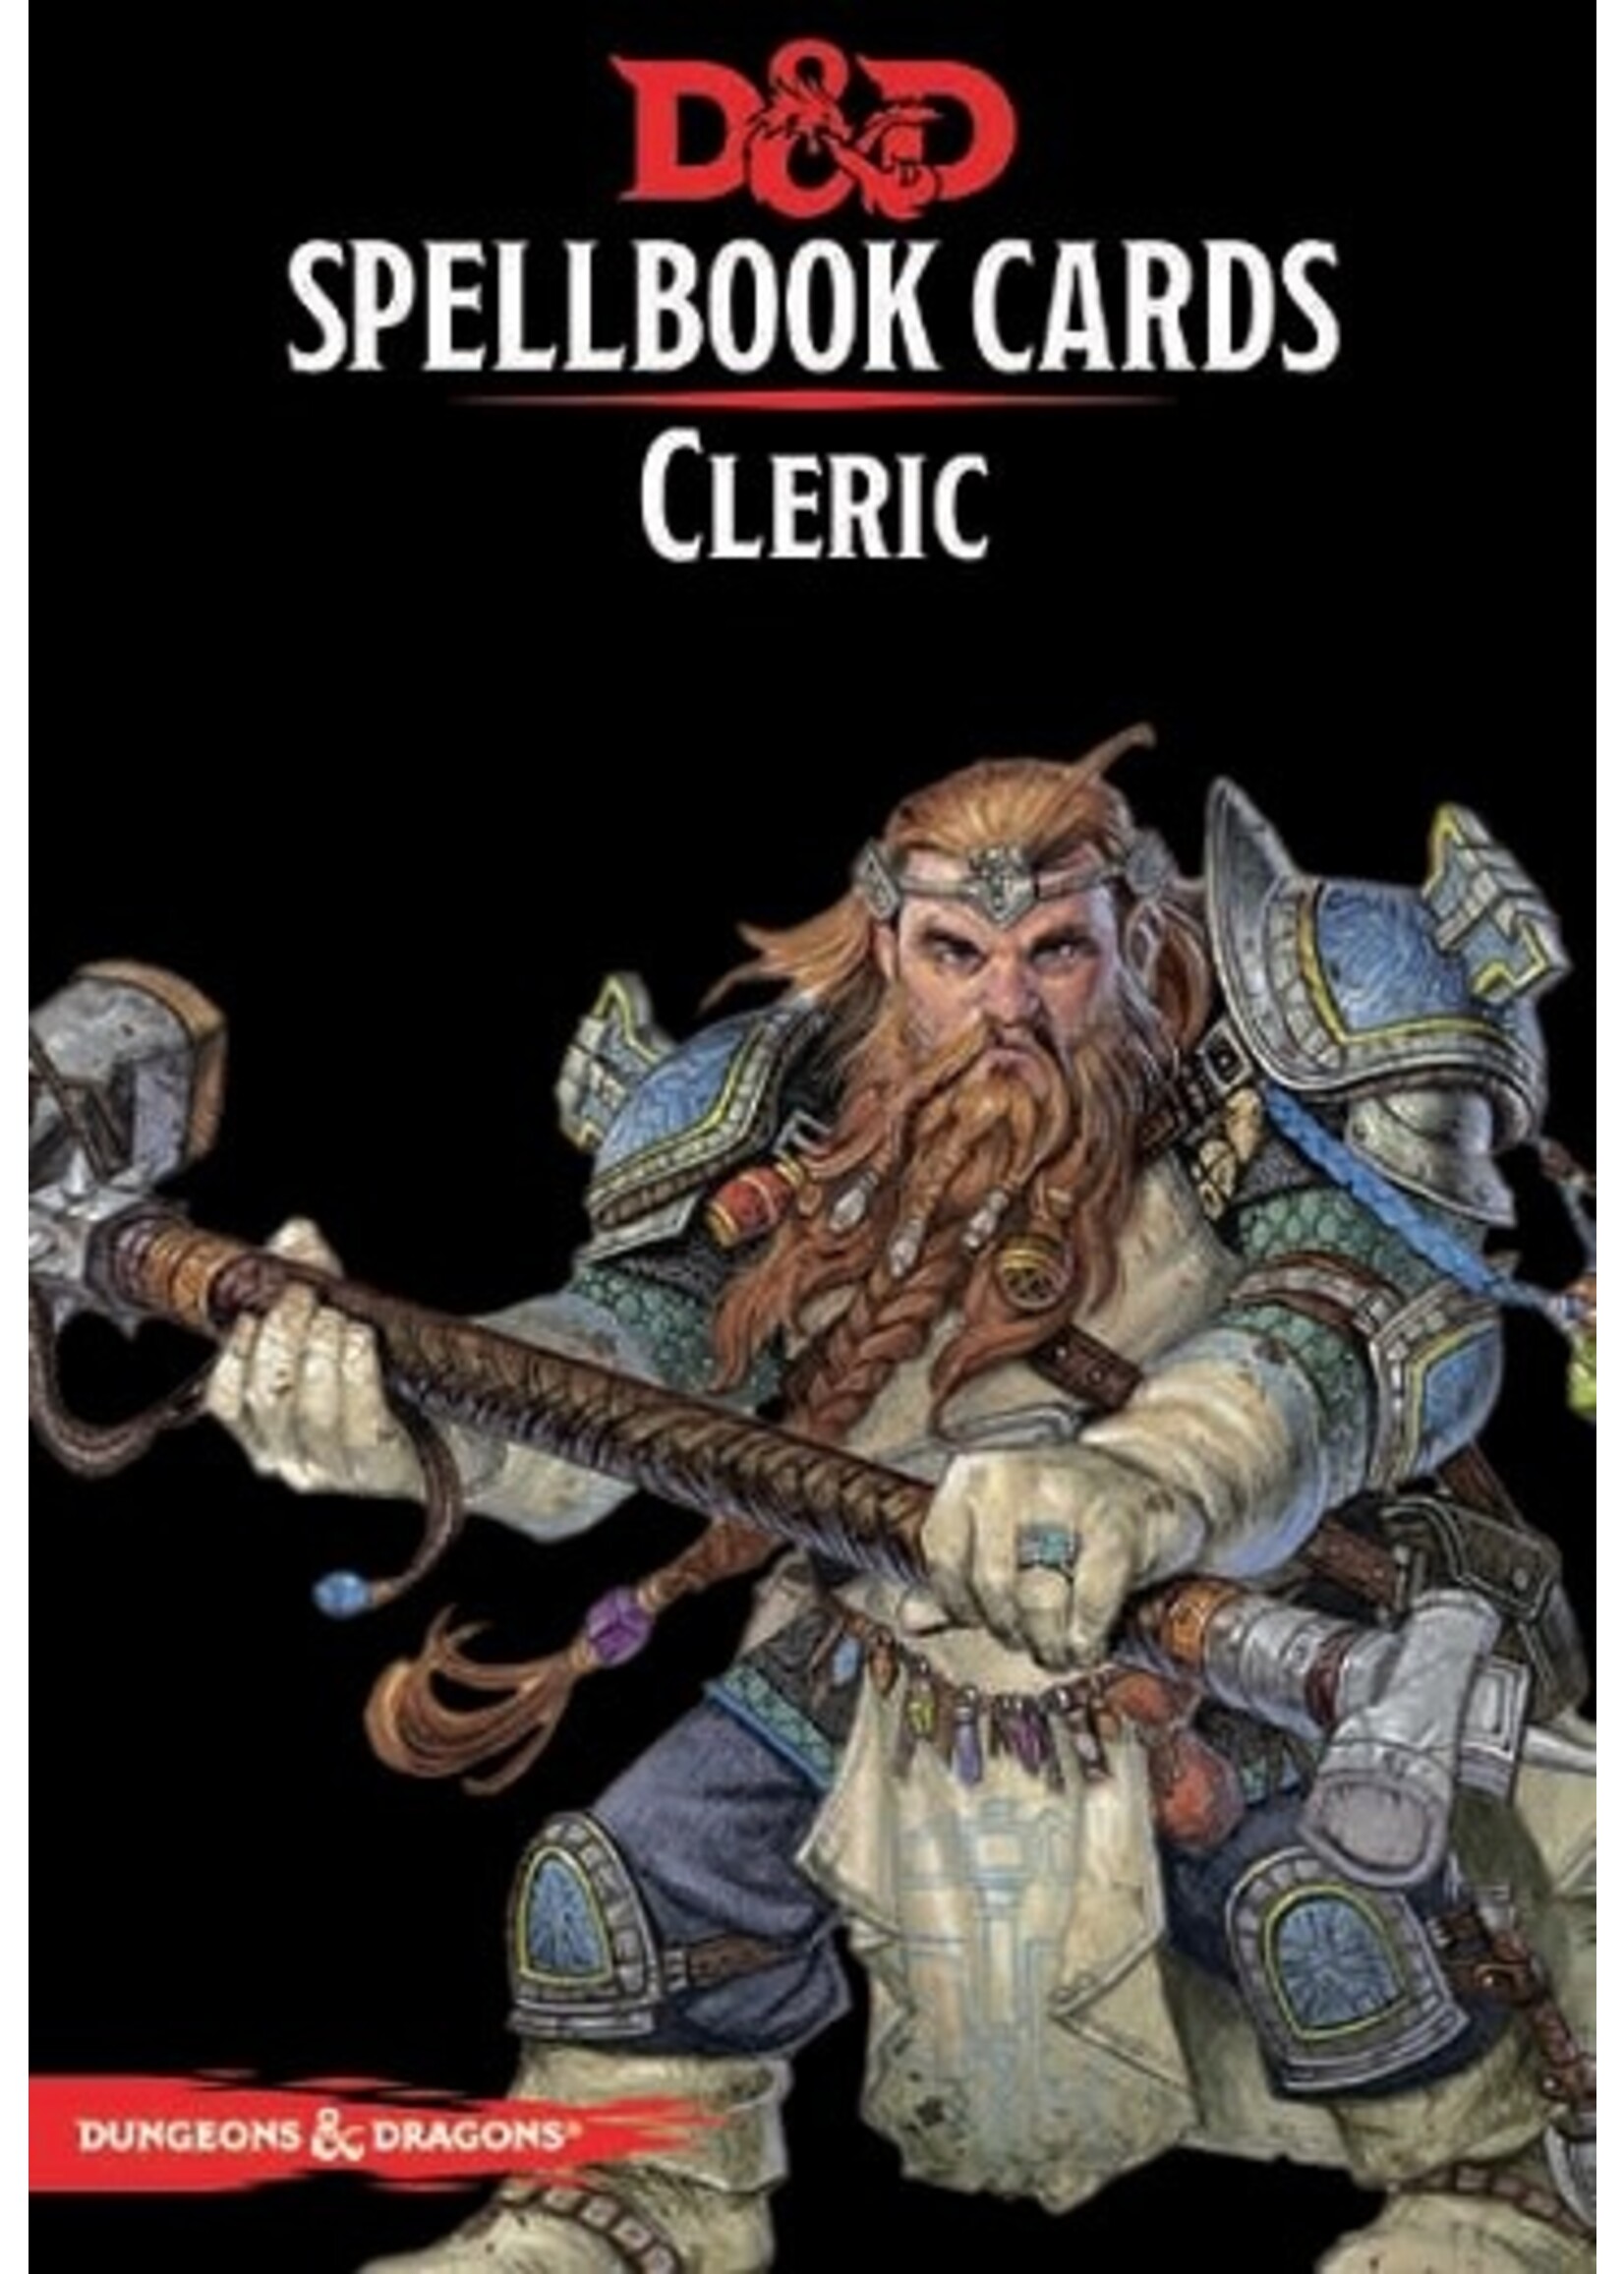 DND SPELLBOOK CARDS CLERIC 2ND EDITION